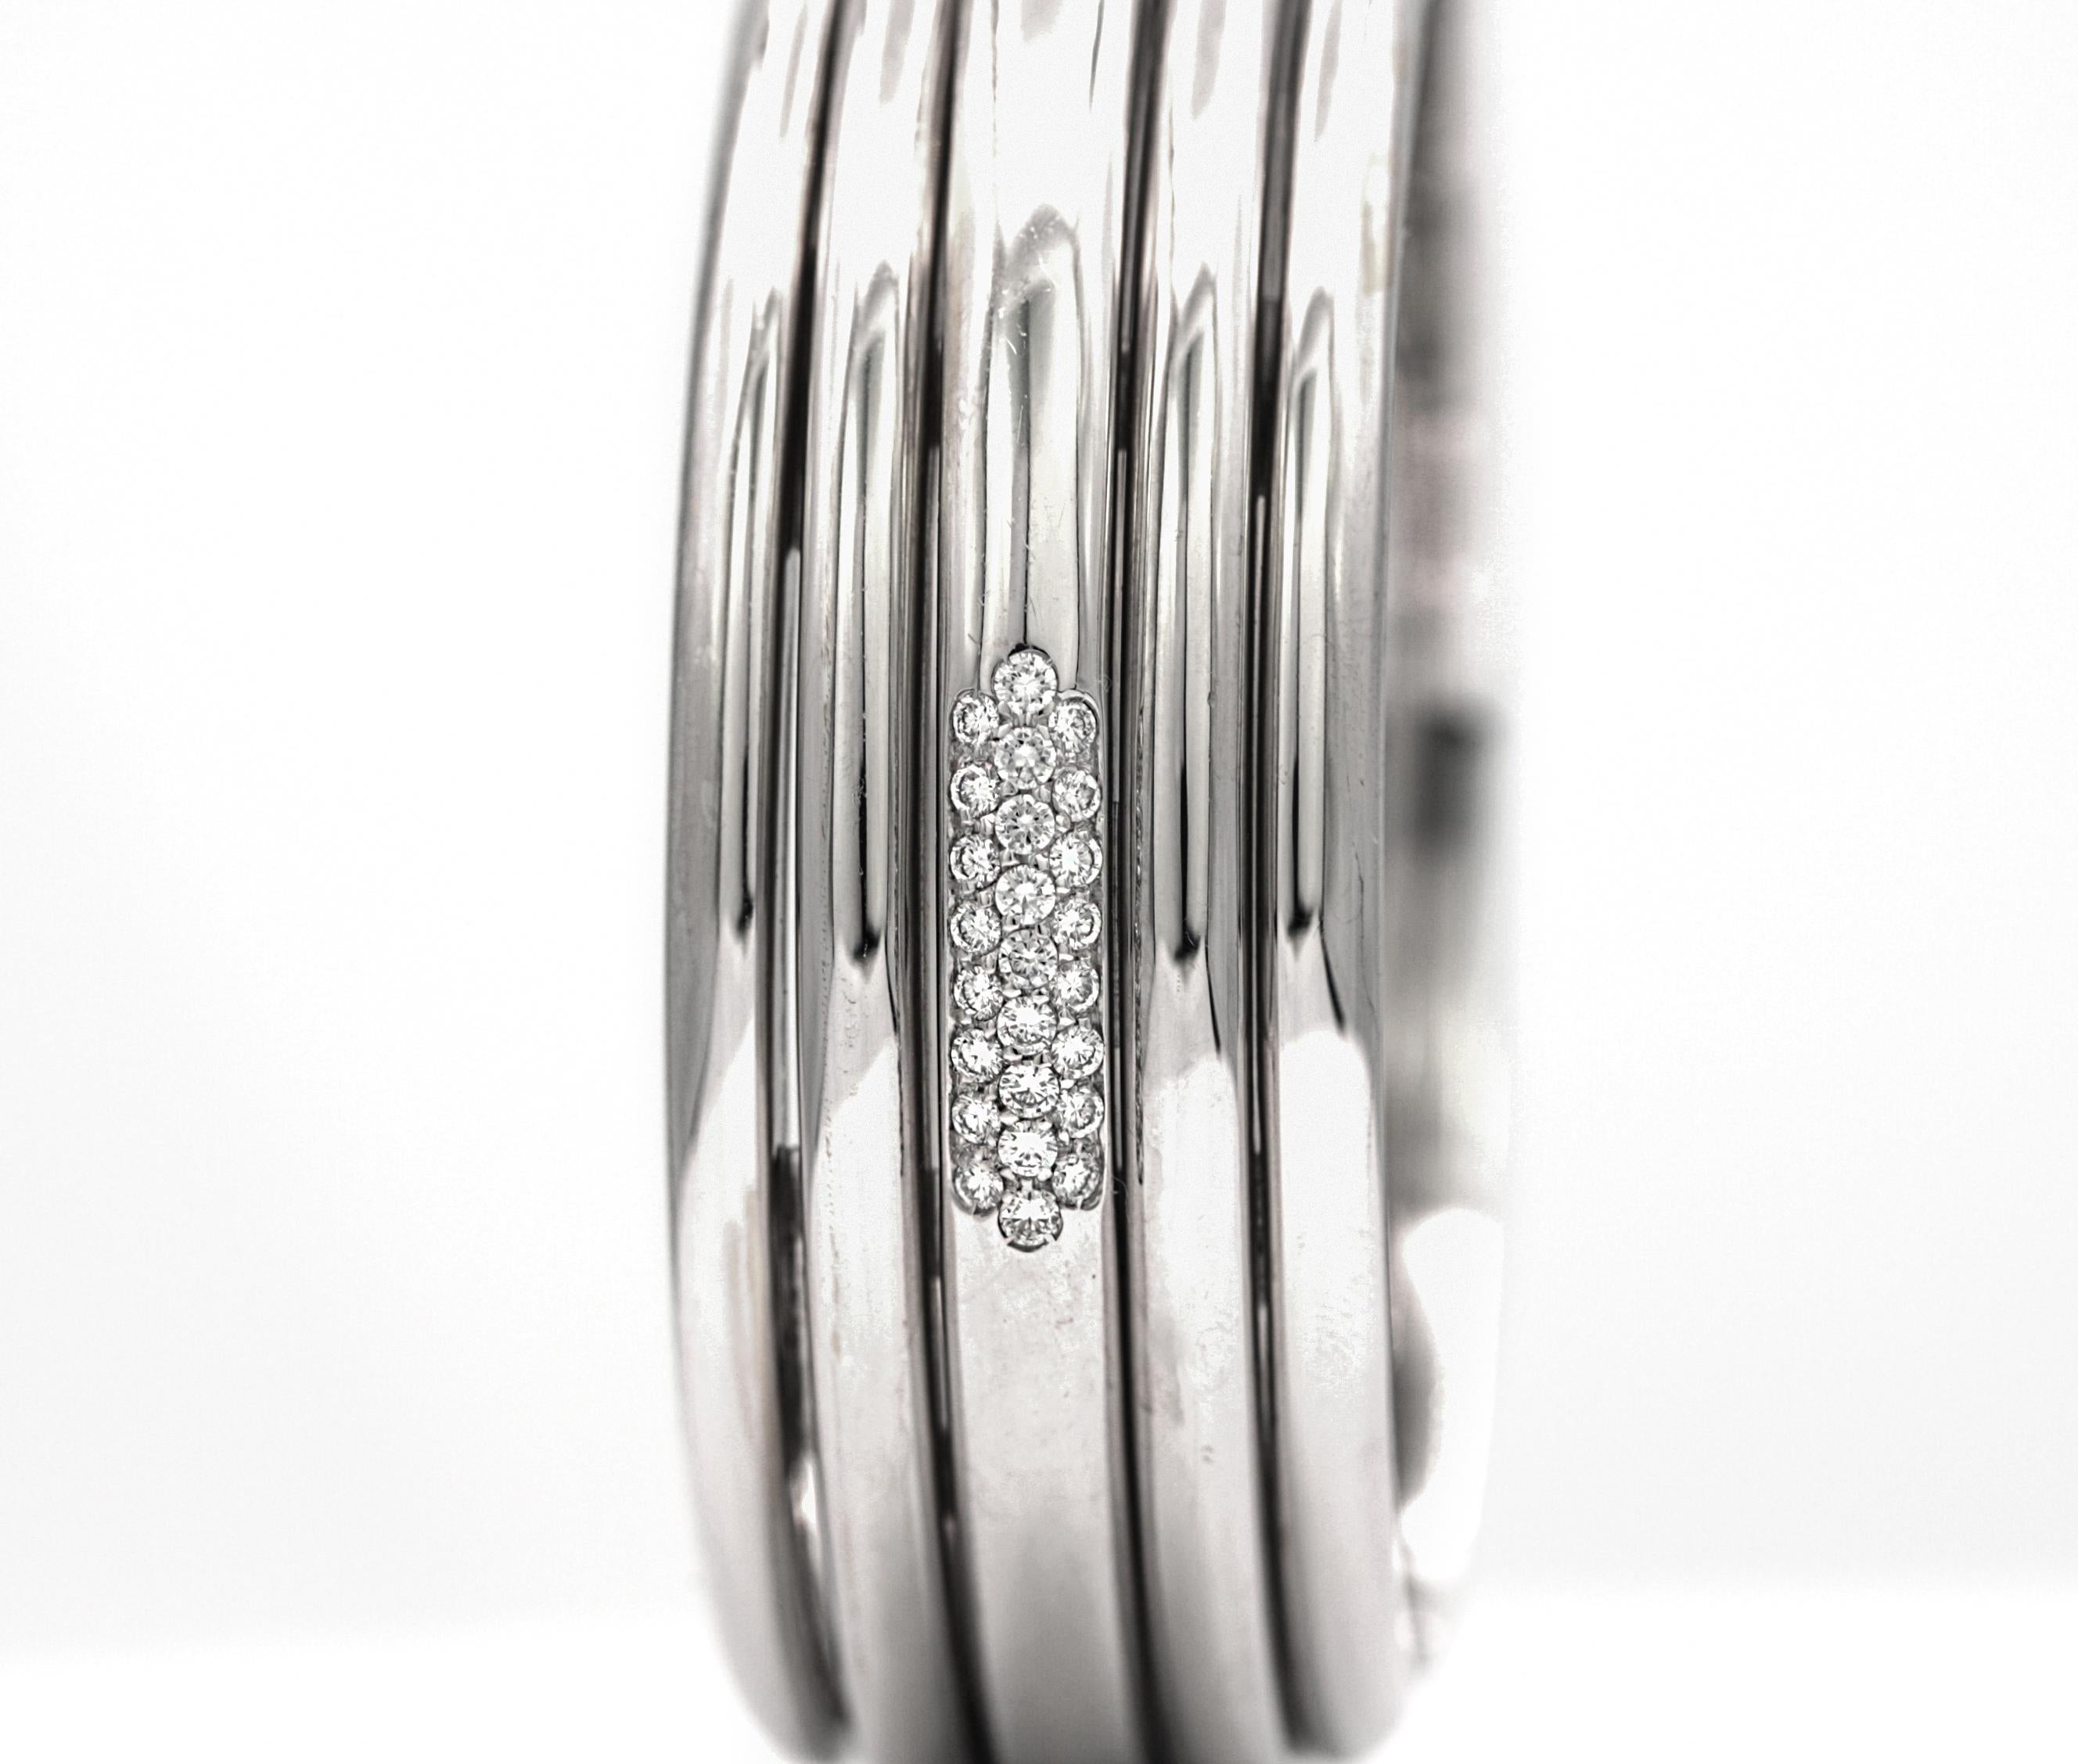 Contemporary Piaget Possession Bangle with Diamonds Bracelet in 18 Karat White Gold For Sale